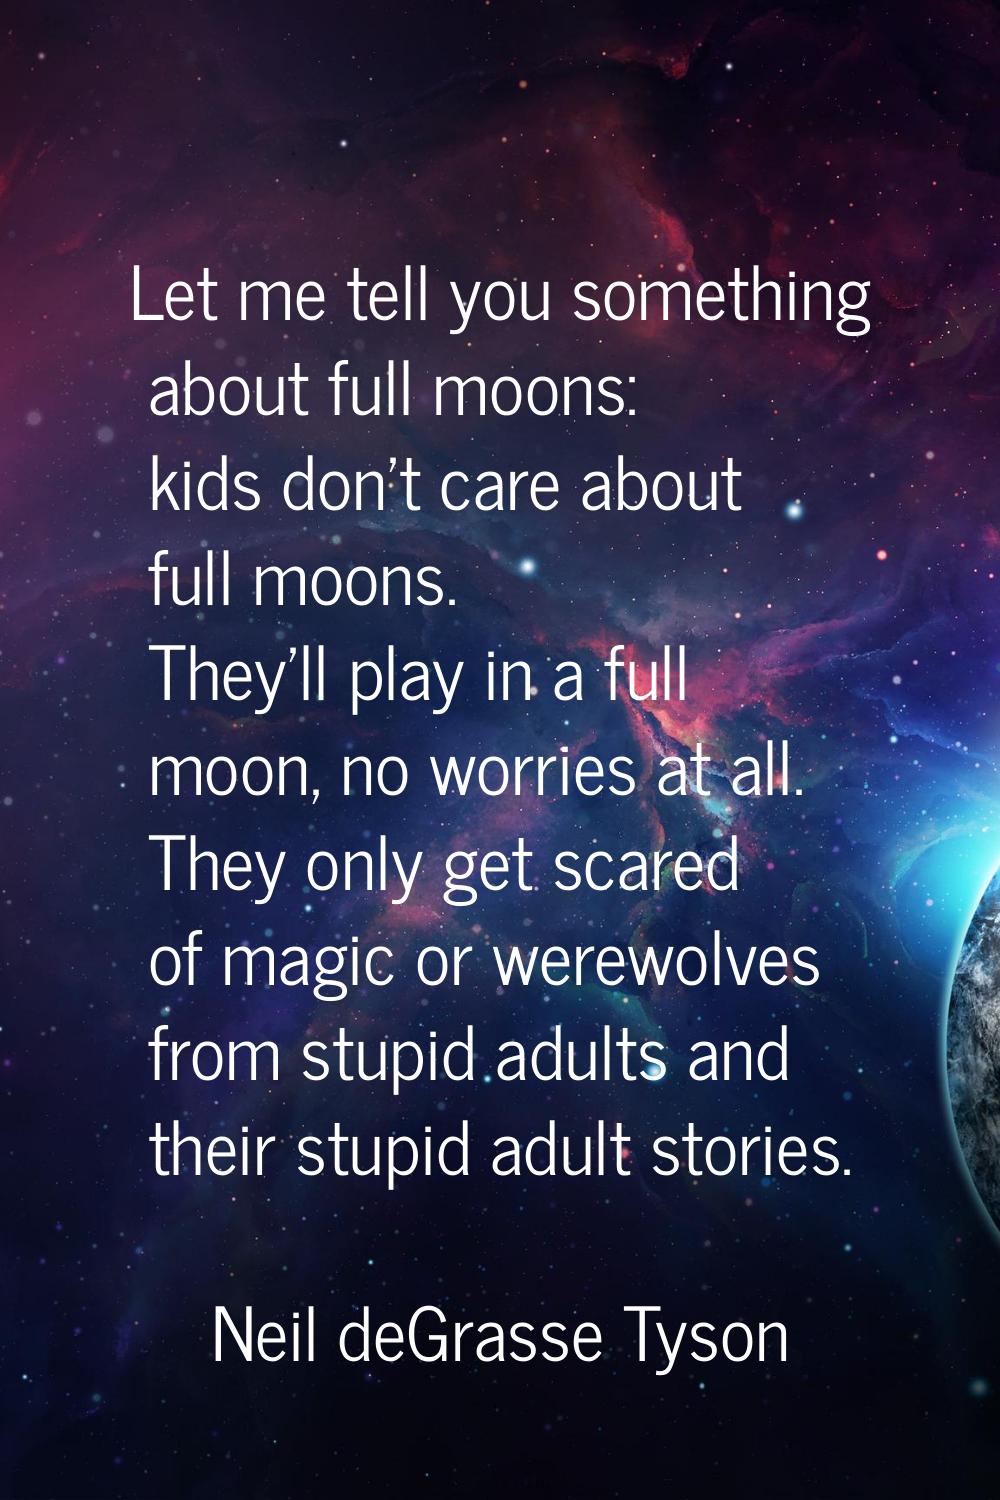 Let me tell you something about full moons: kids don't care about full moons. They'll play in a ful